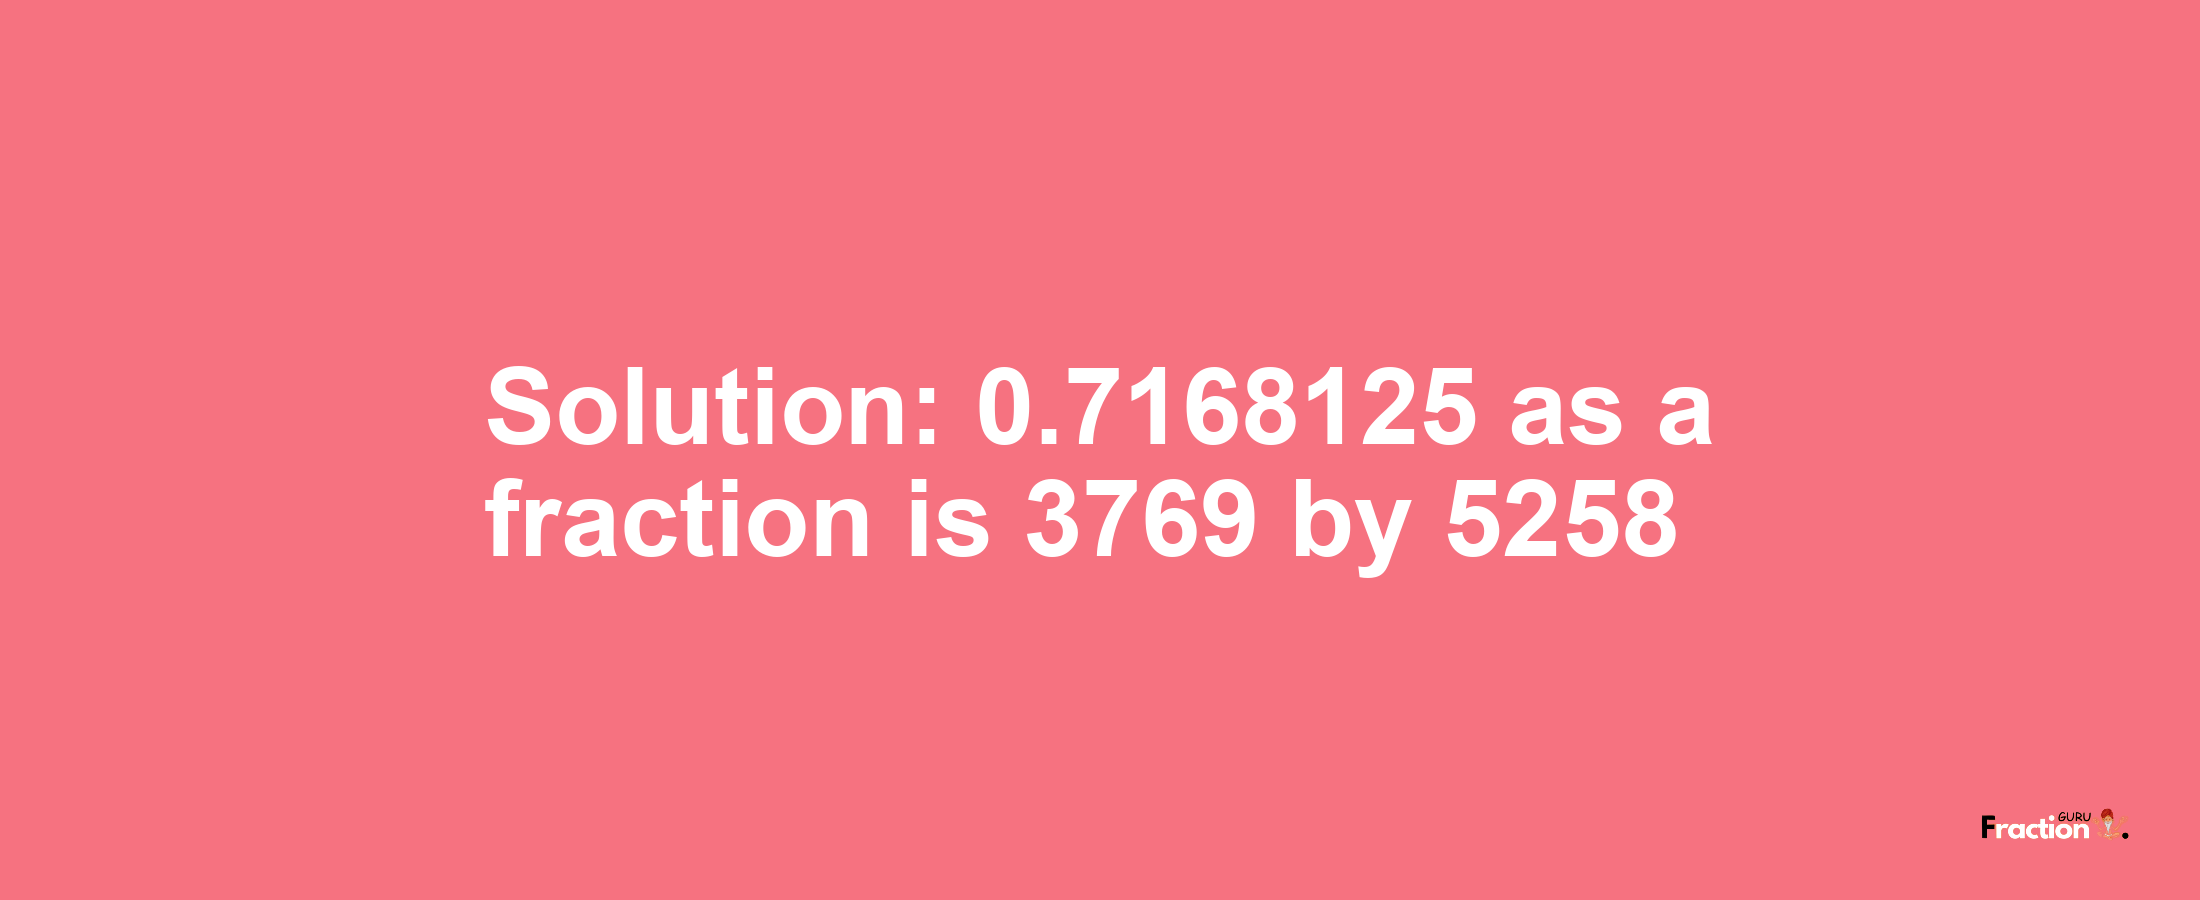 Solution:0.7168125 as a fraction is 3769/5258